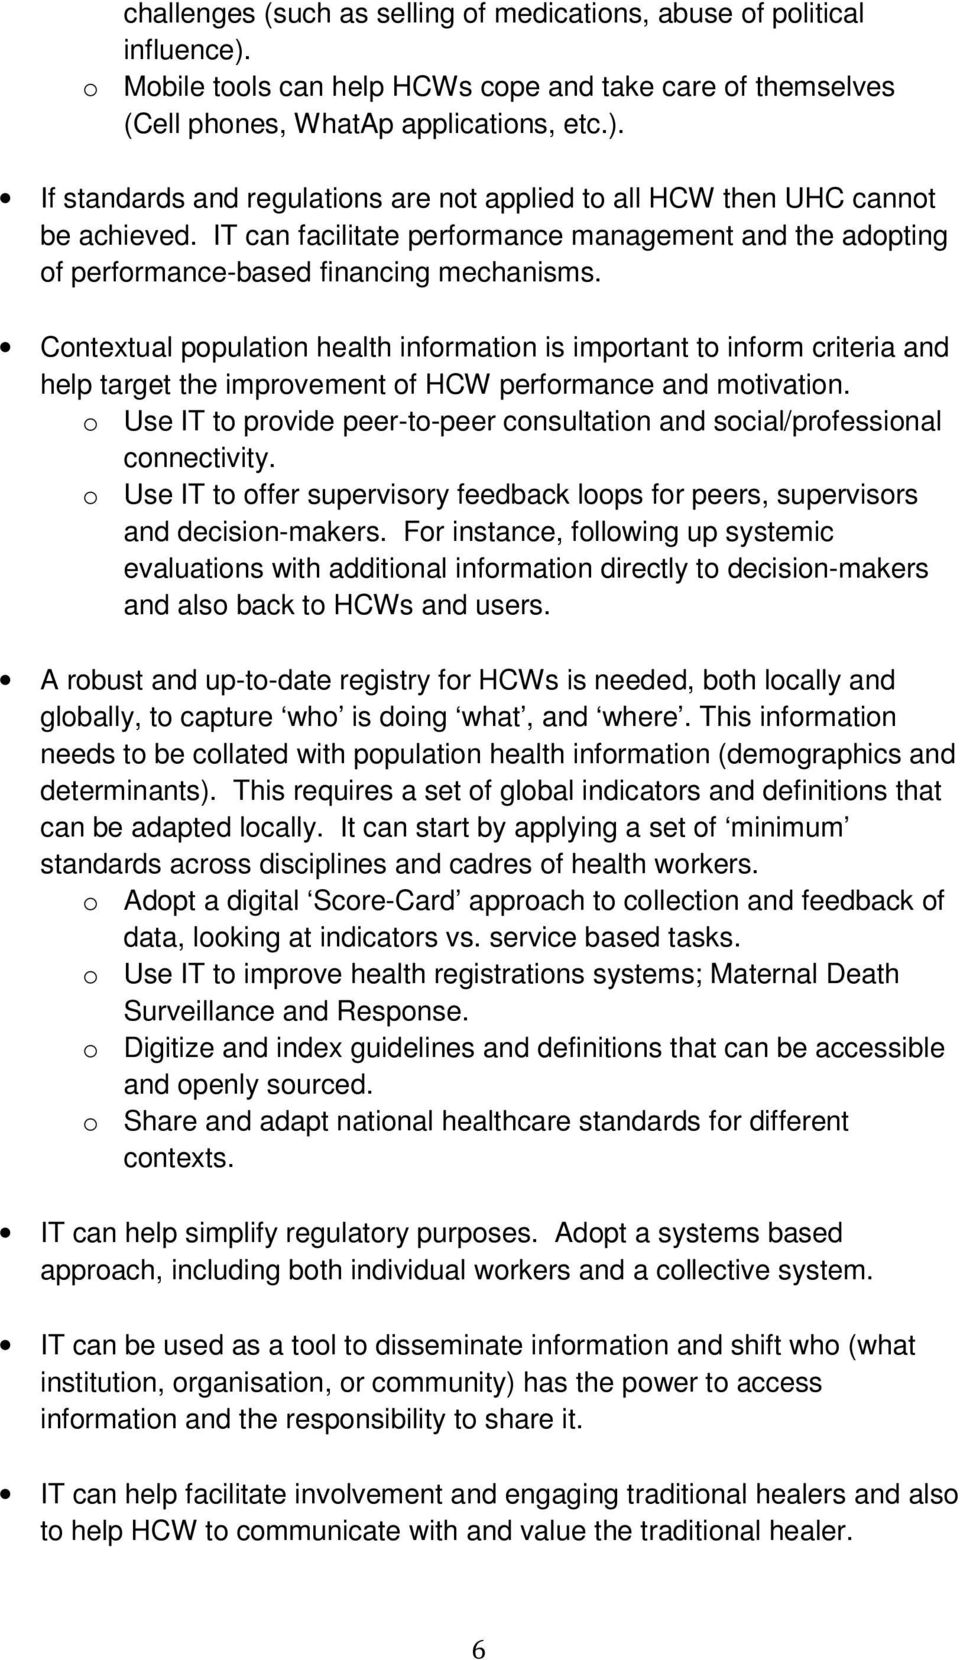 Contextual population health information is important to inform criteria and help target the improvement of HCW performance and motivation.